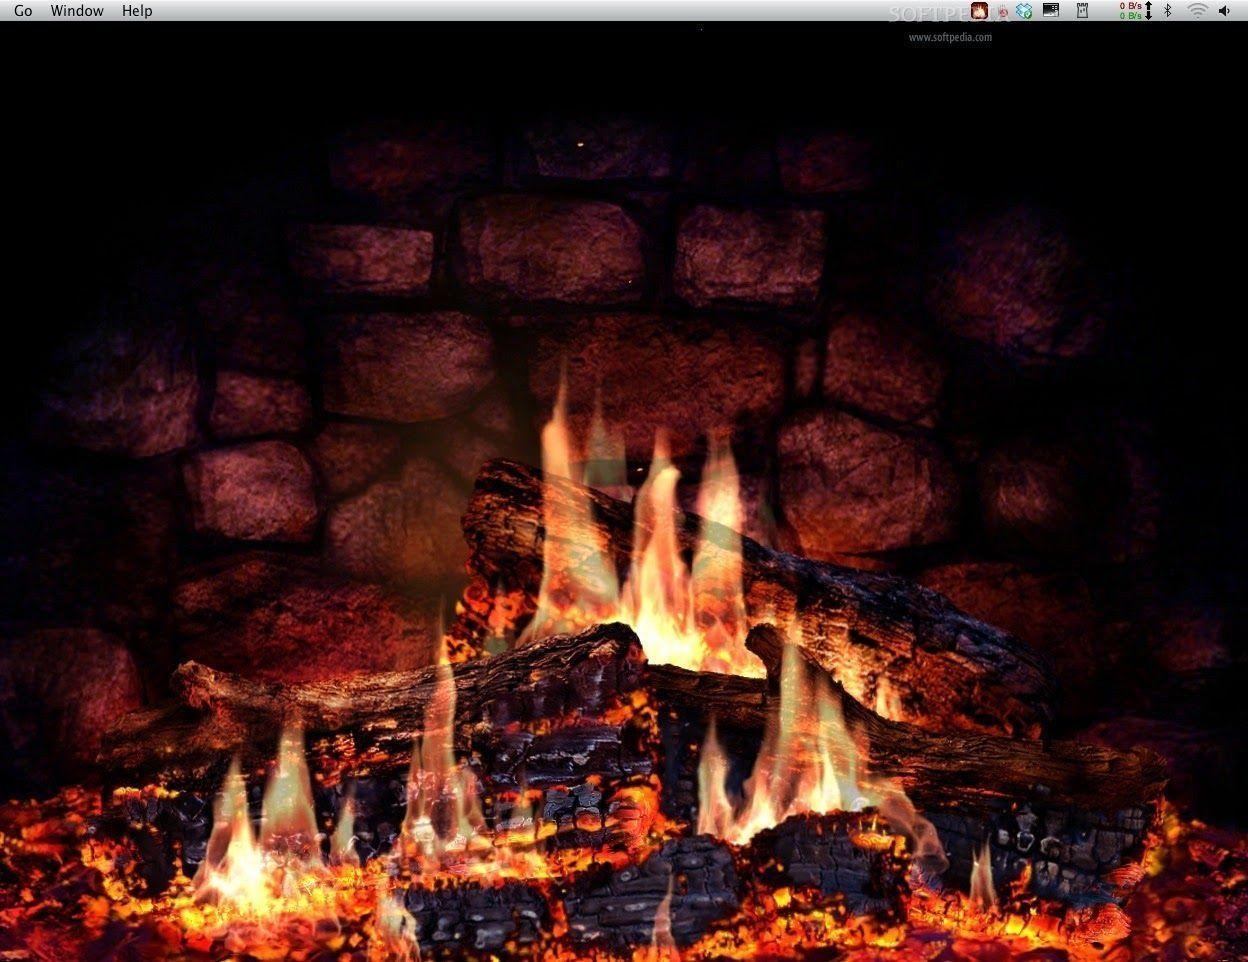 Wallpaper For > Animated Christmas Fireplace Wallpaper